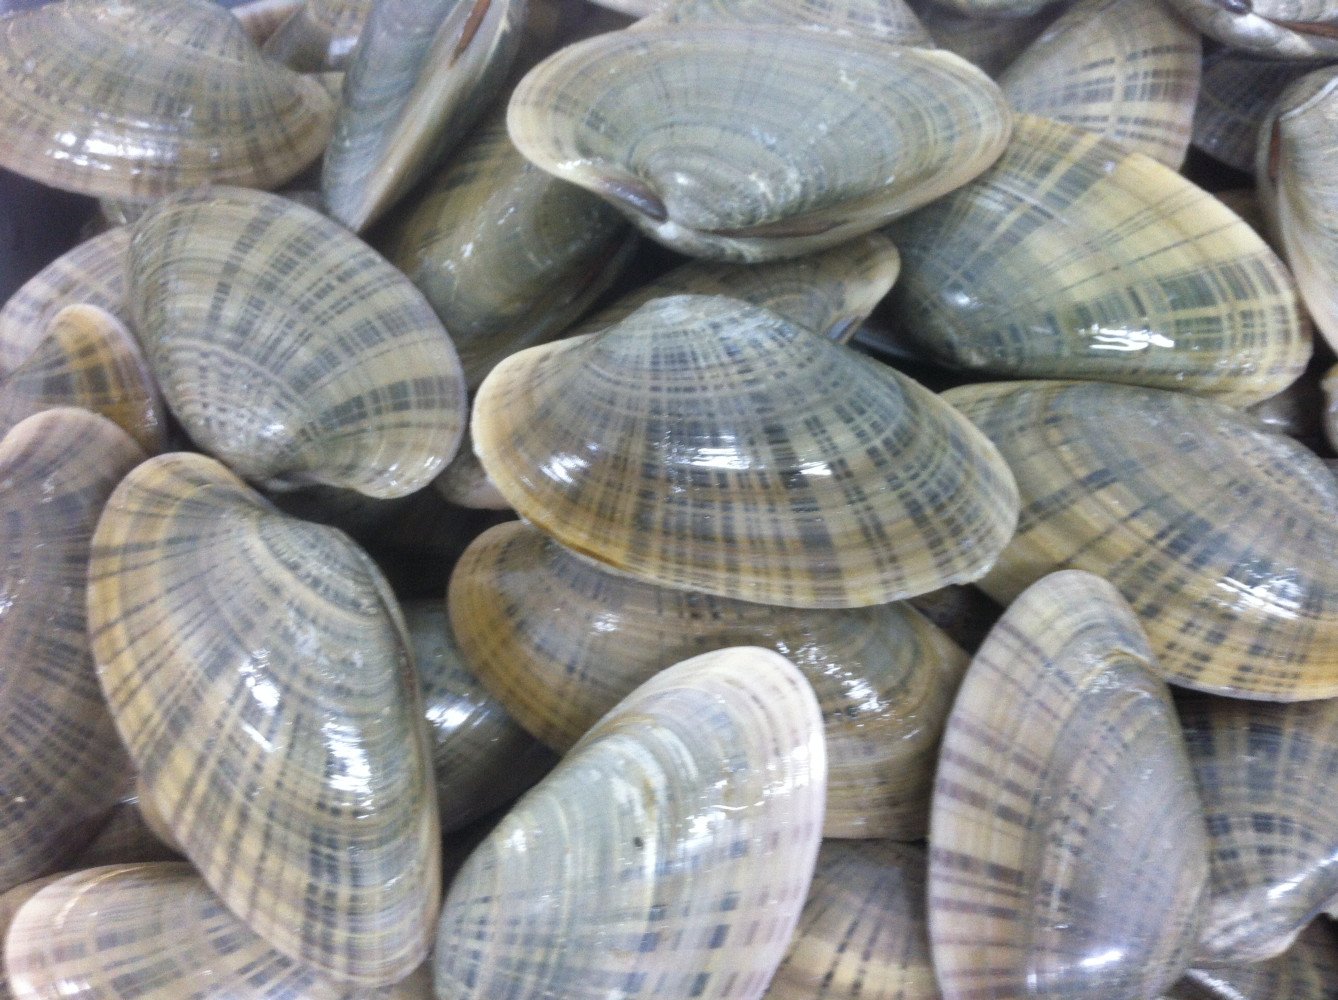 WE BEGAN THE SUNRAY CLAM DEVELOPMENT ELEVEN YEARS AGO WITH THE 1ST SPAWN

VAN LEWIS OF ST. TERESA FLORIDA WAS THE VISIONARY THAT FIRST ESTABLISHED IT AS AN AQUACULTURE PRODUCT

(Macrocallista nimbosa)